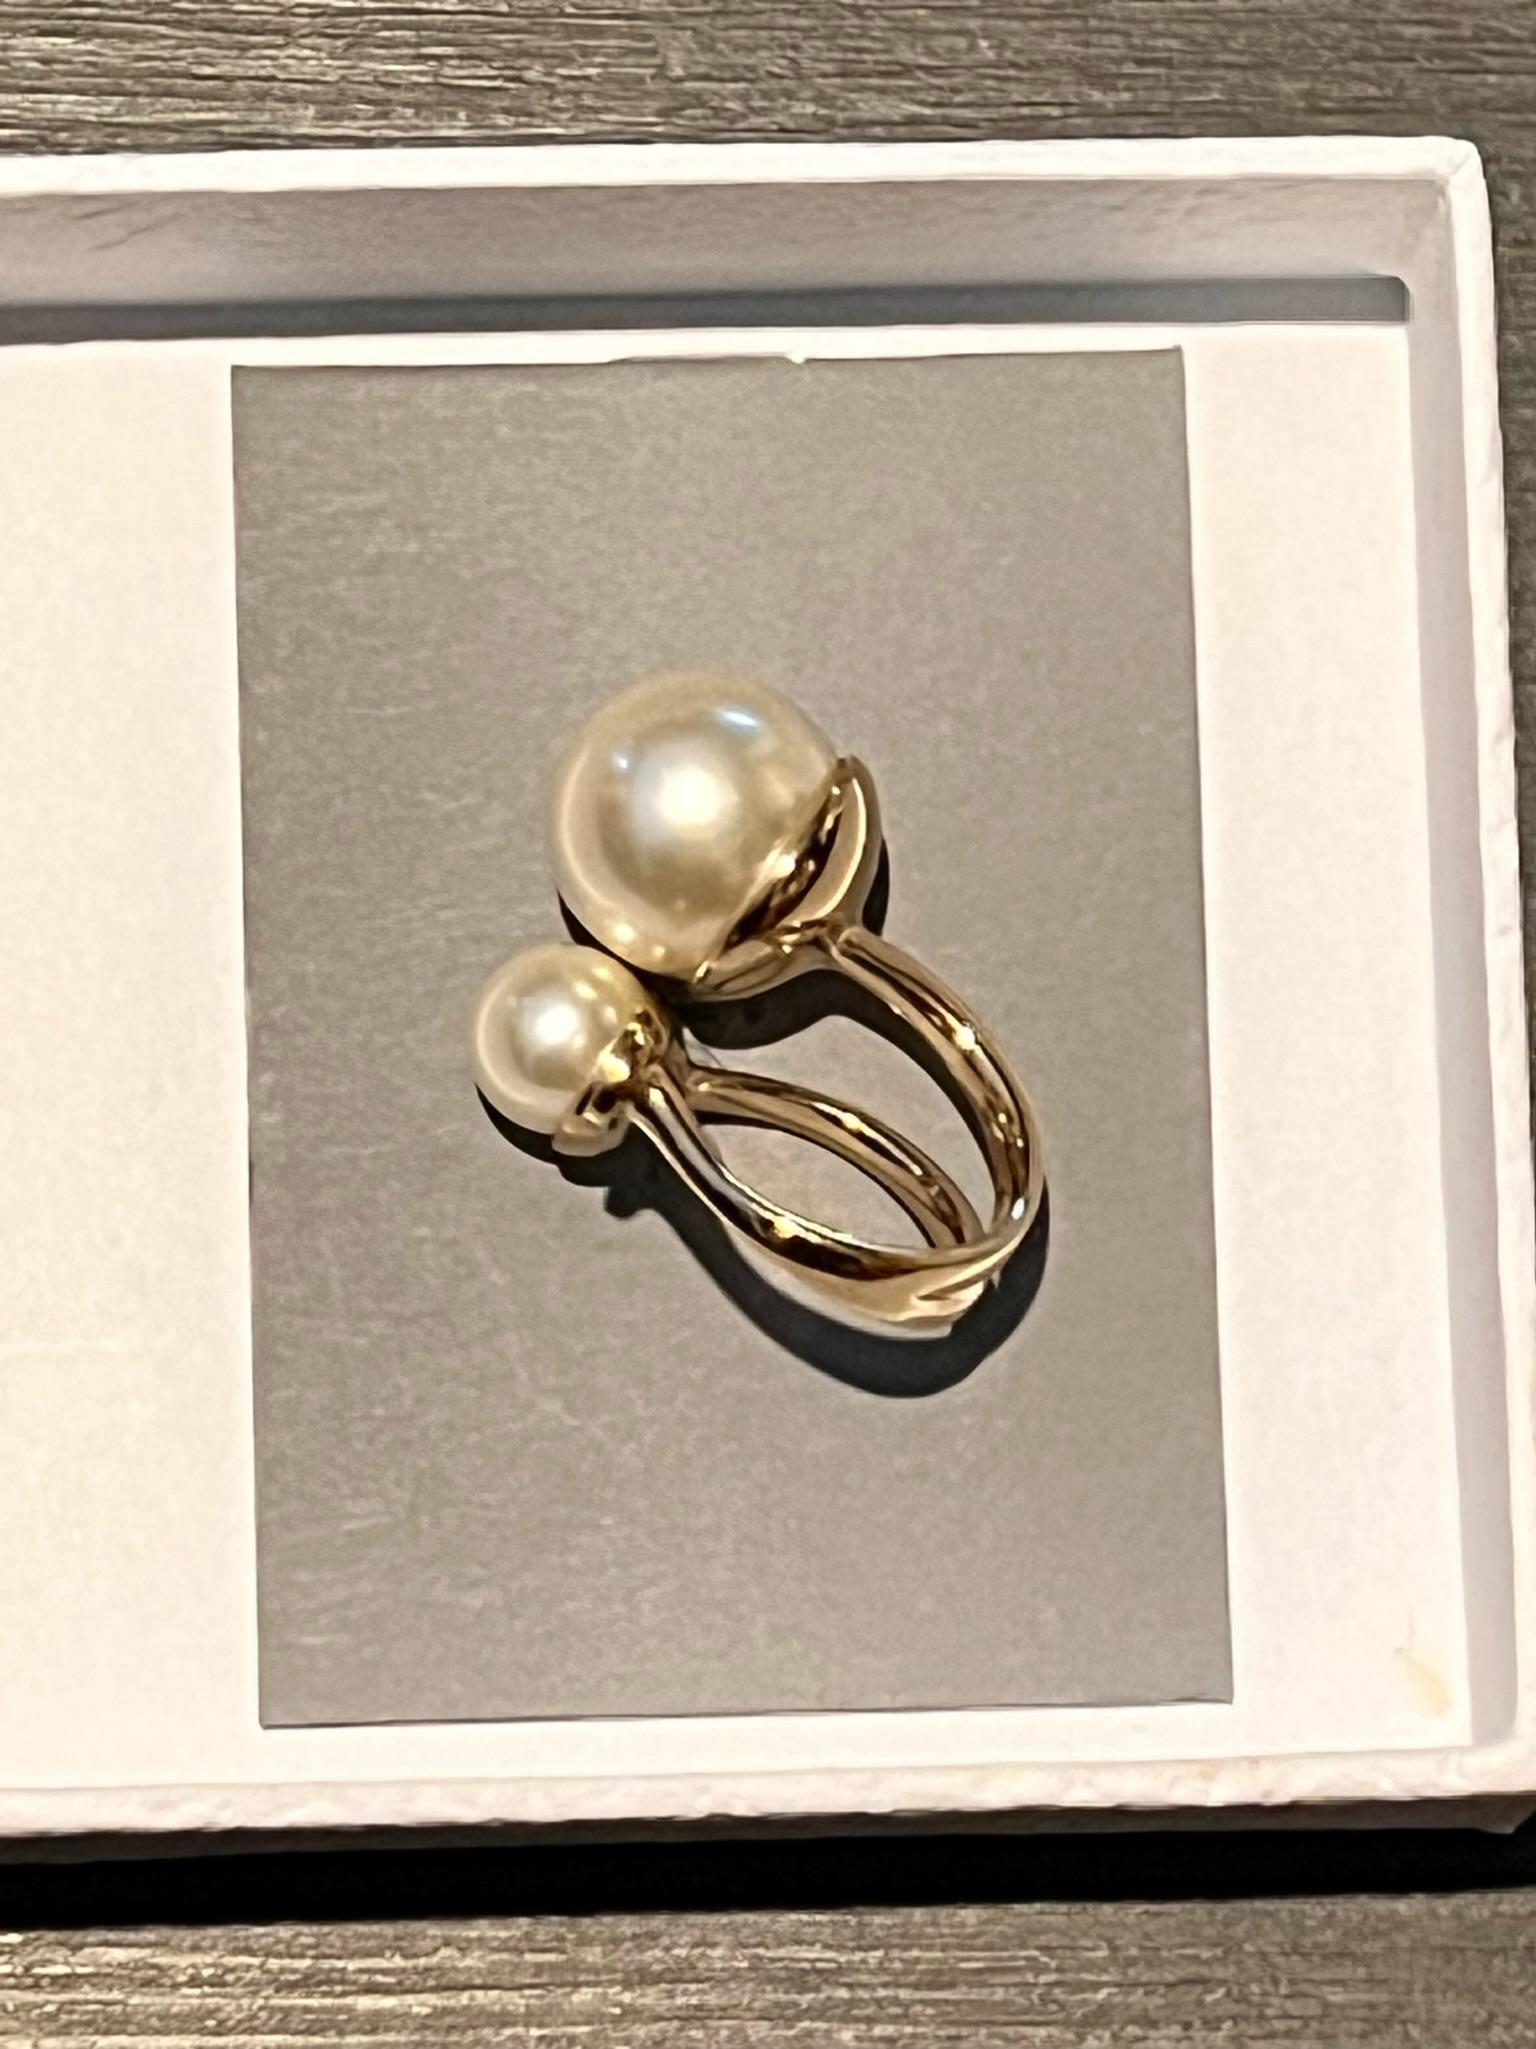 Uniquely designed in an open structured silhouette, this 'Ultradior' ring is a must-have.

It is made of a gold-tone metal featuring two faux pearl beads on one end and a stamped 'CD' logo on the other. 

Matching Earrings available.

Comes with